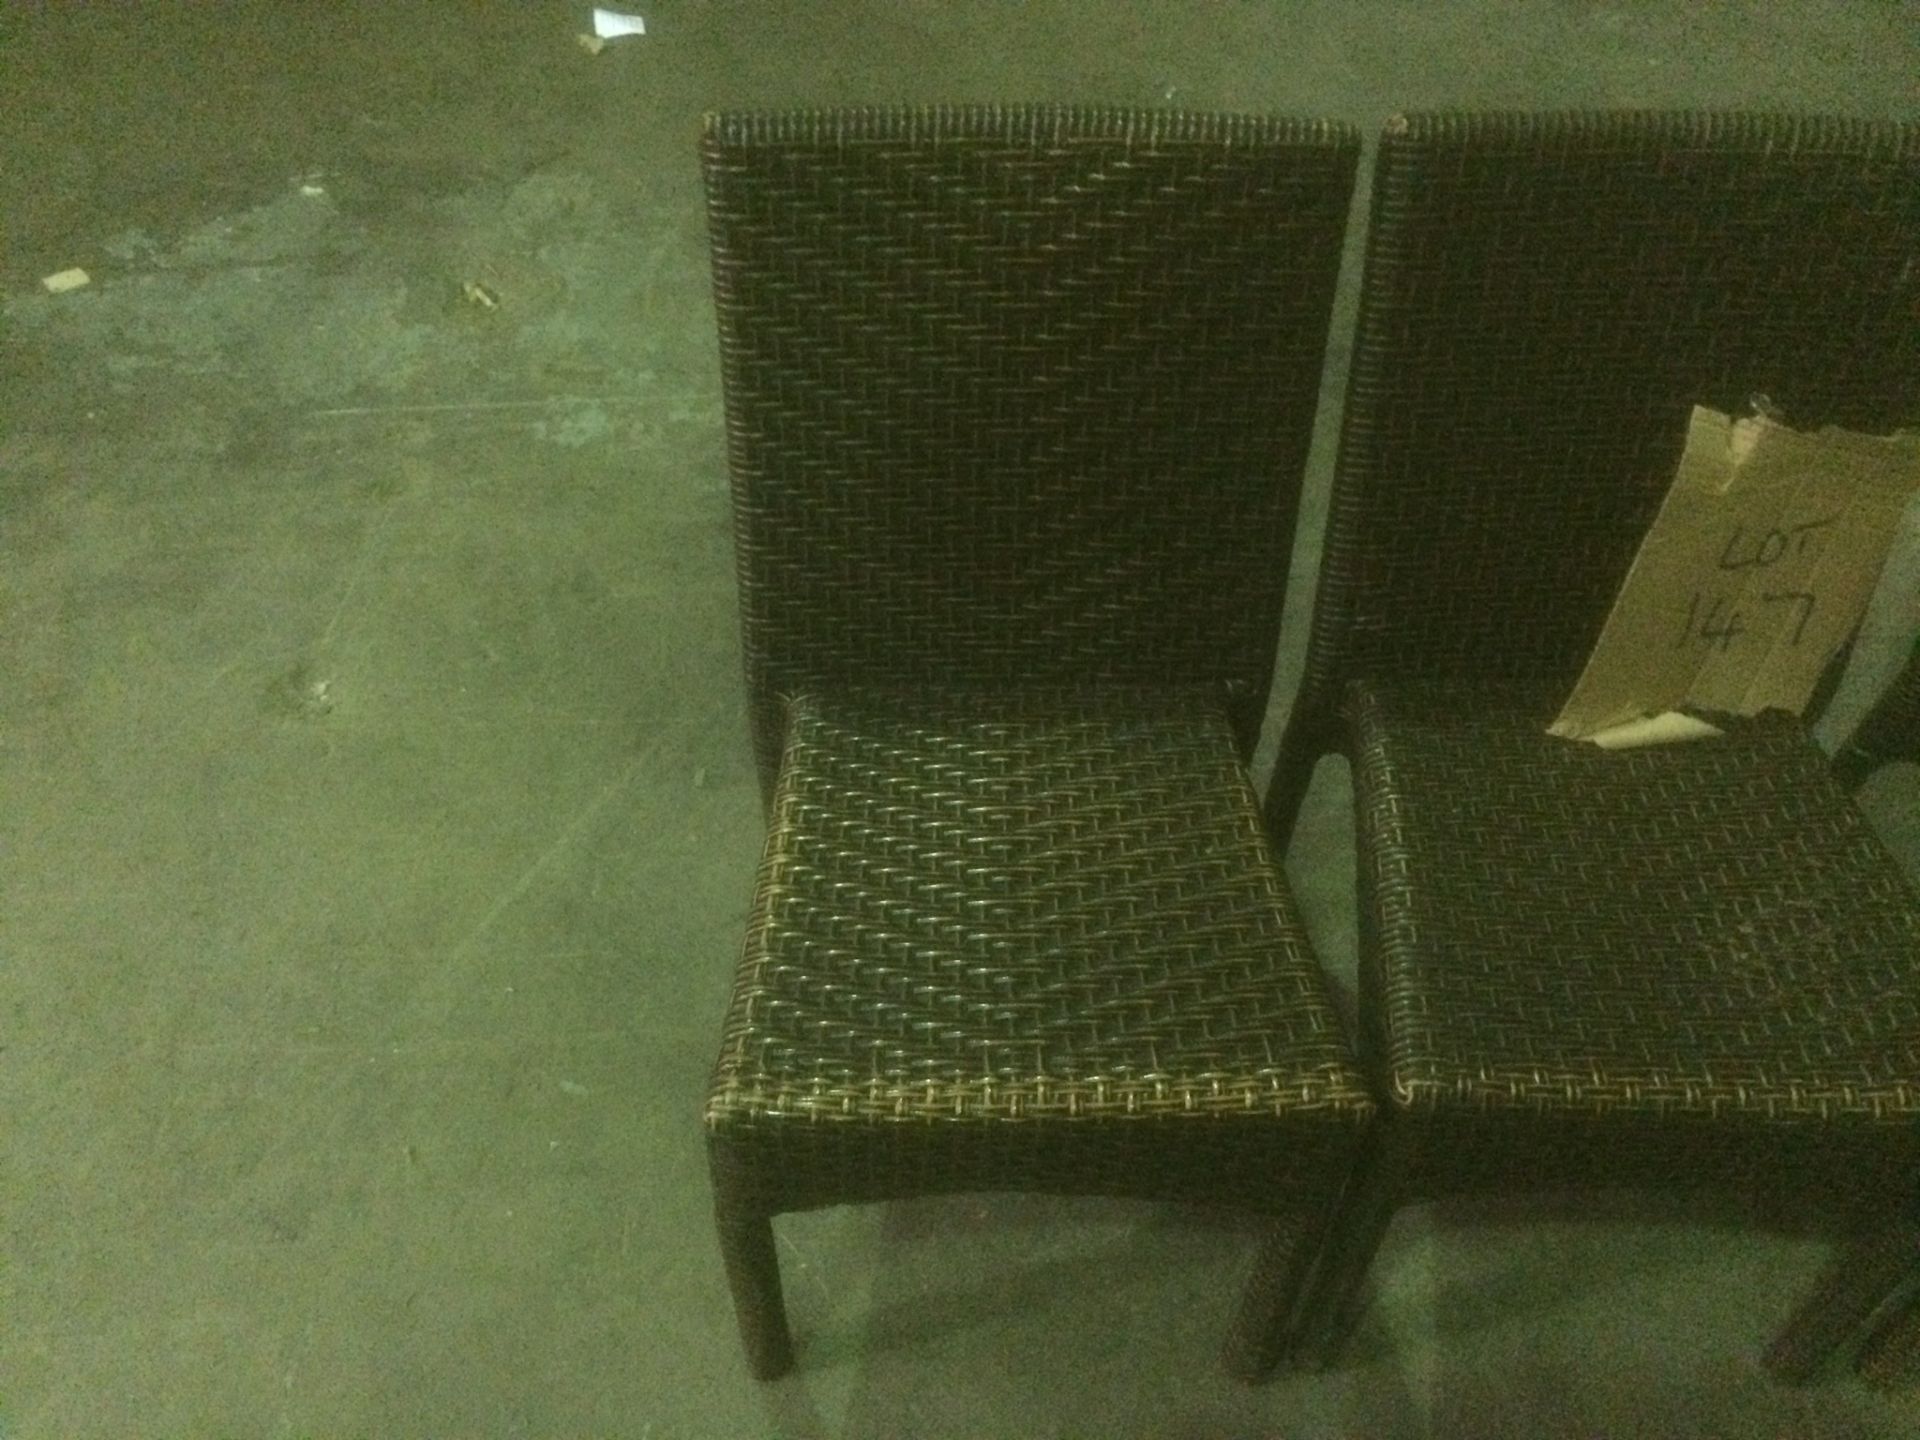 6 x brown woven cane garden chairs - Image 3 of 3